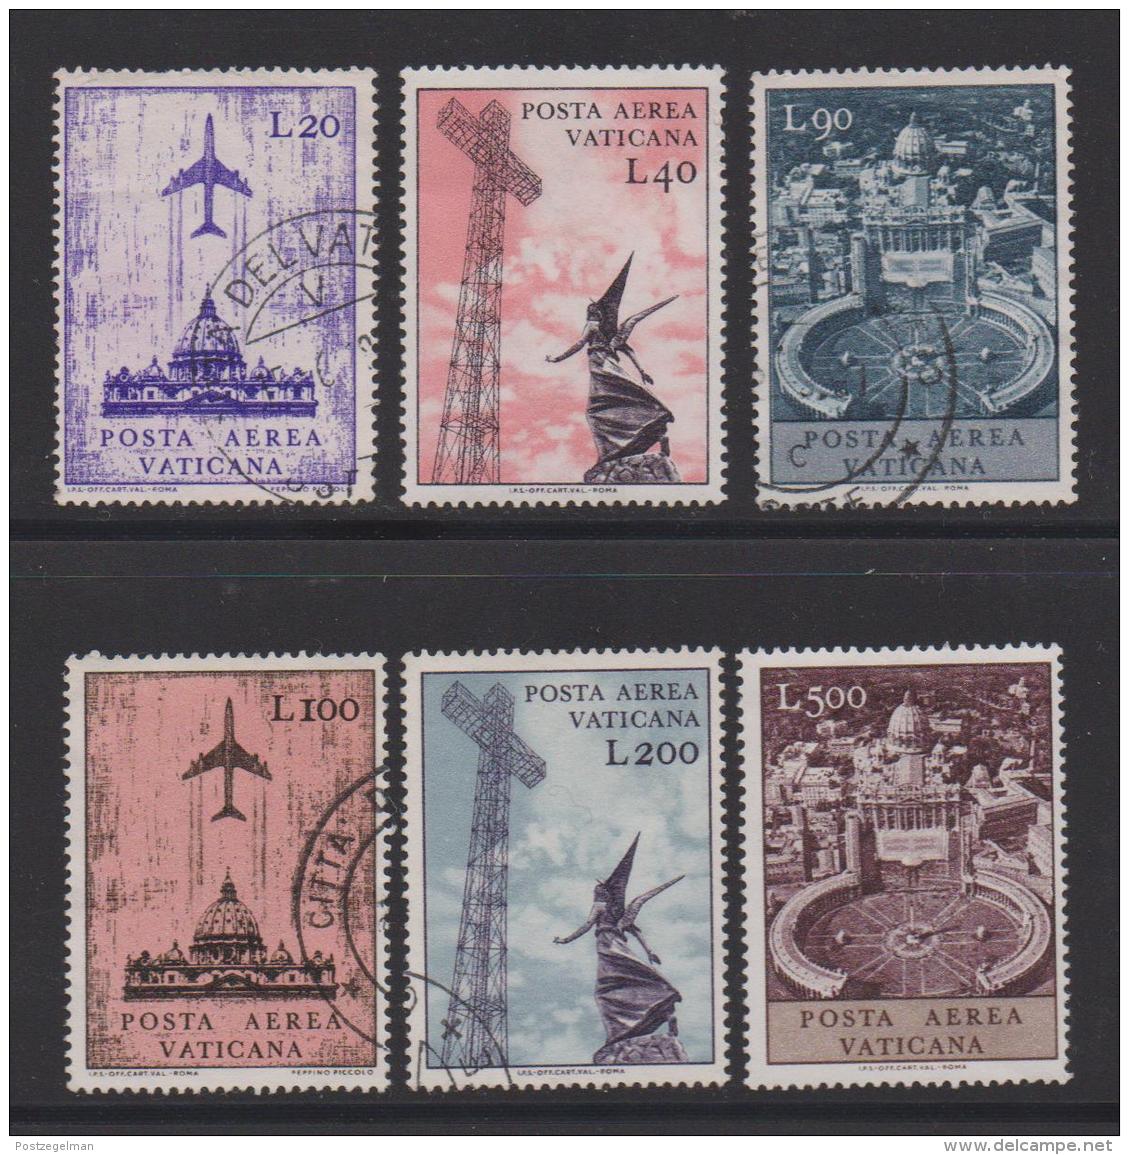 VATICAN, 1967, Mixed Stamps , Jet Airliners Over St. Peter, 517-522, #3936,  Complete - Used Stamps